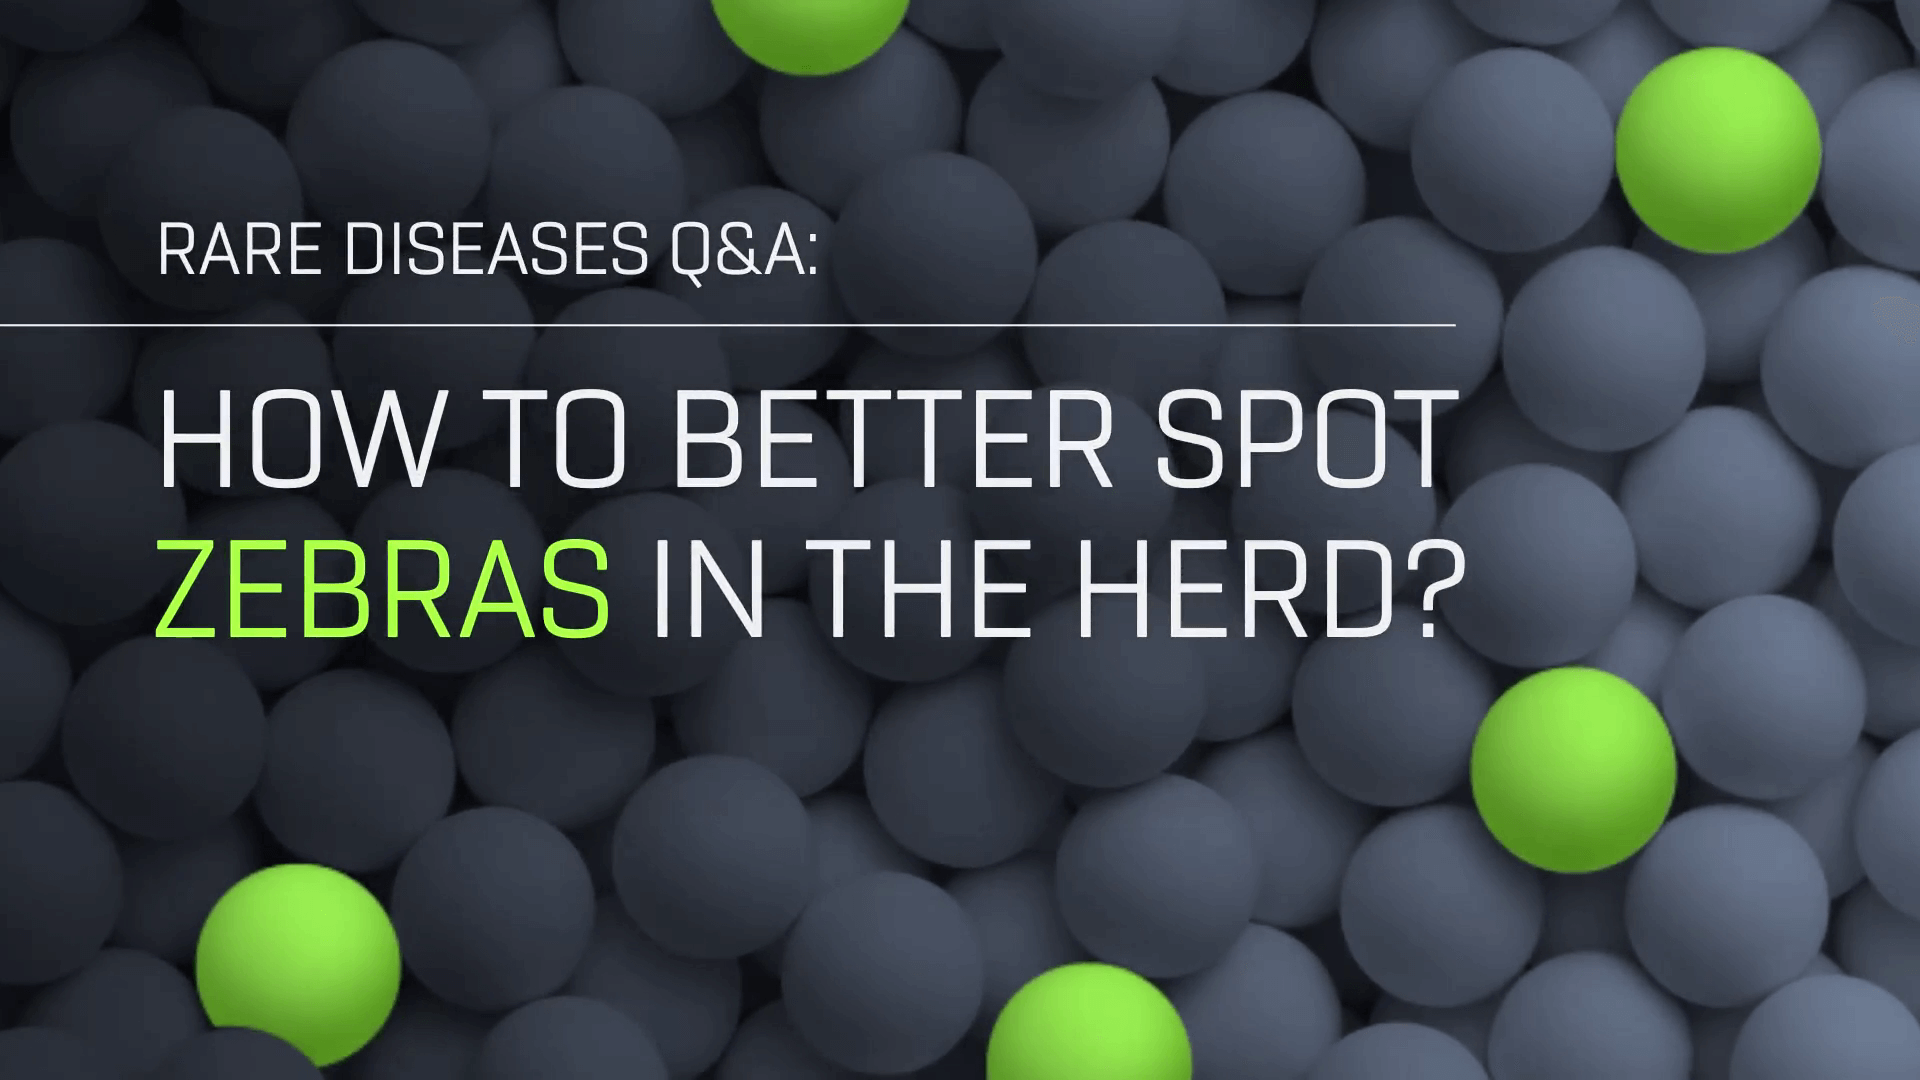 Rare Diseases Q&A: How to Better Spot Zebras in the Herd